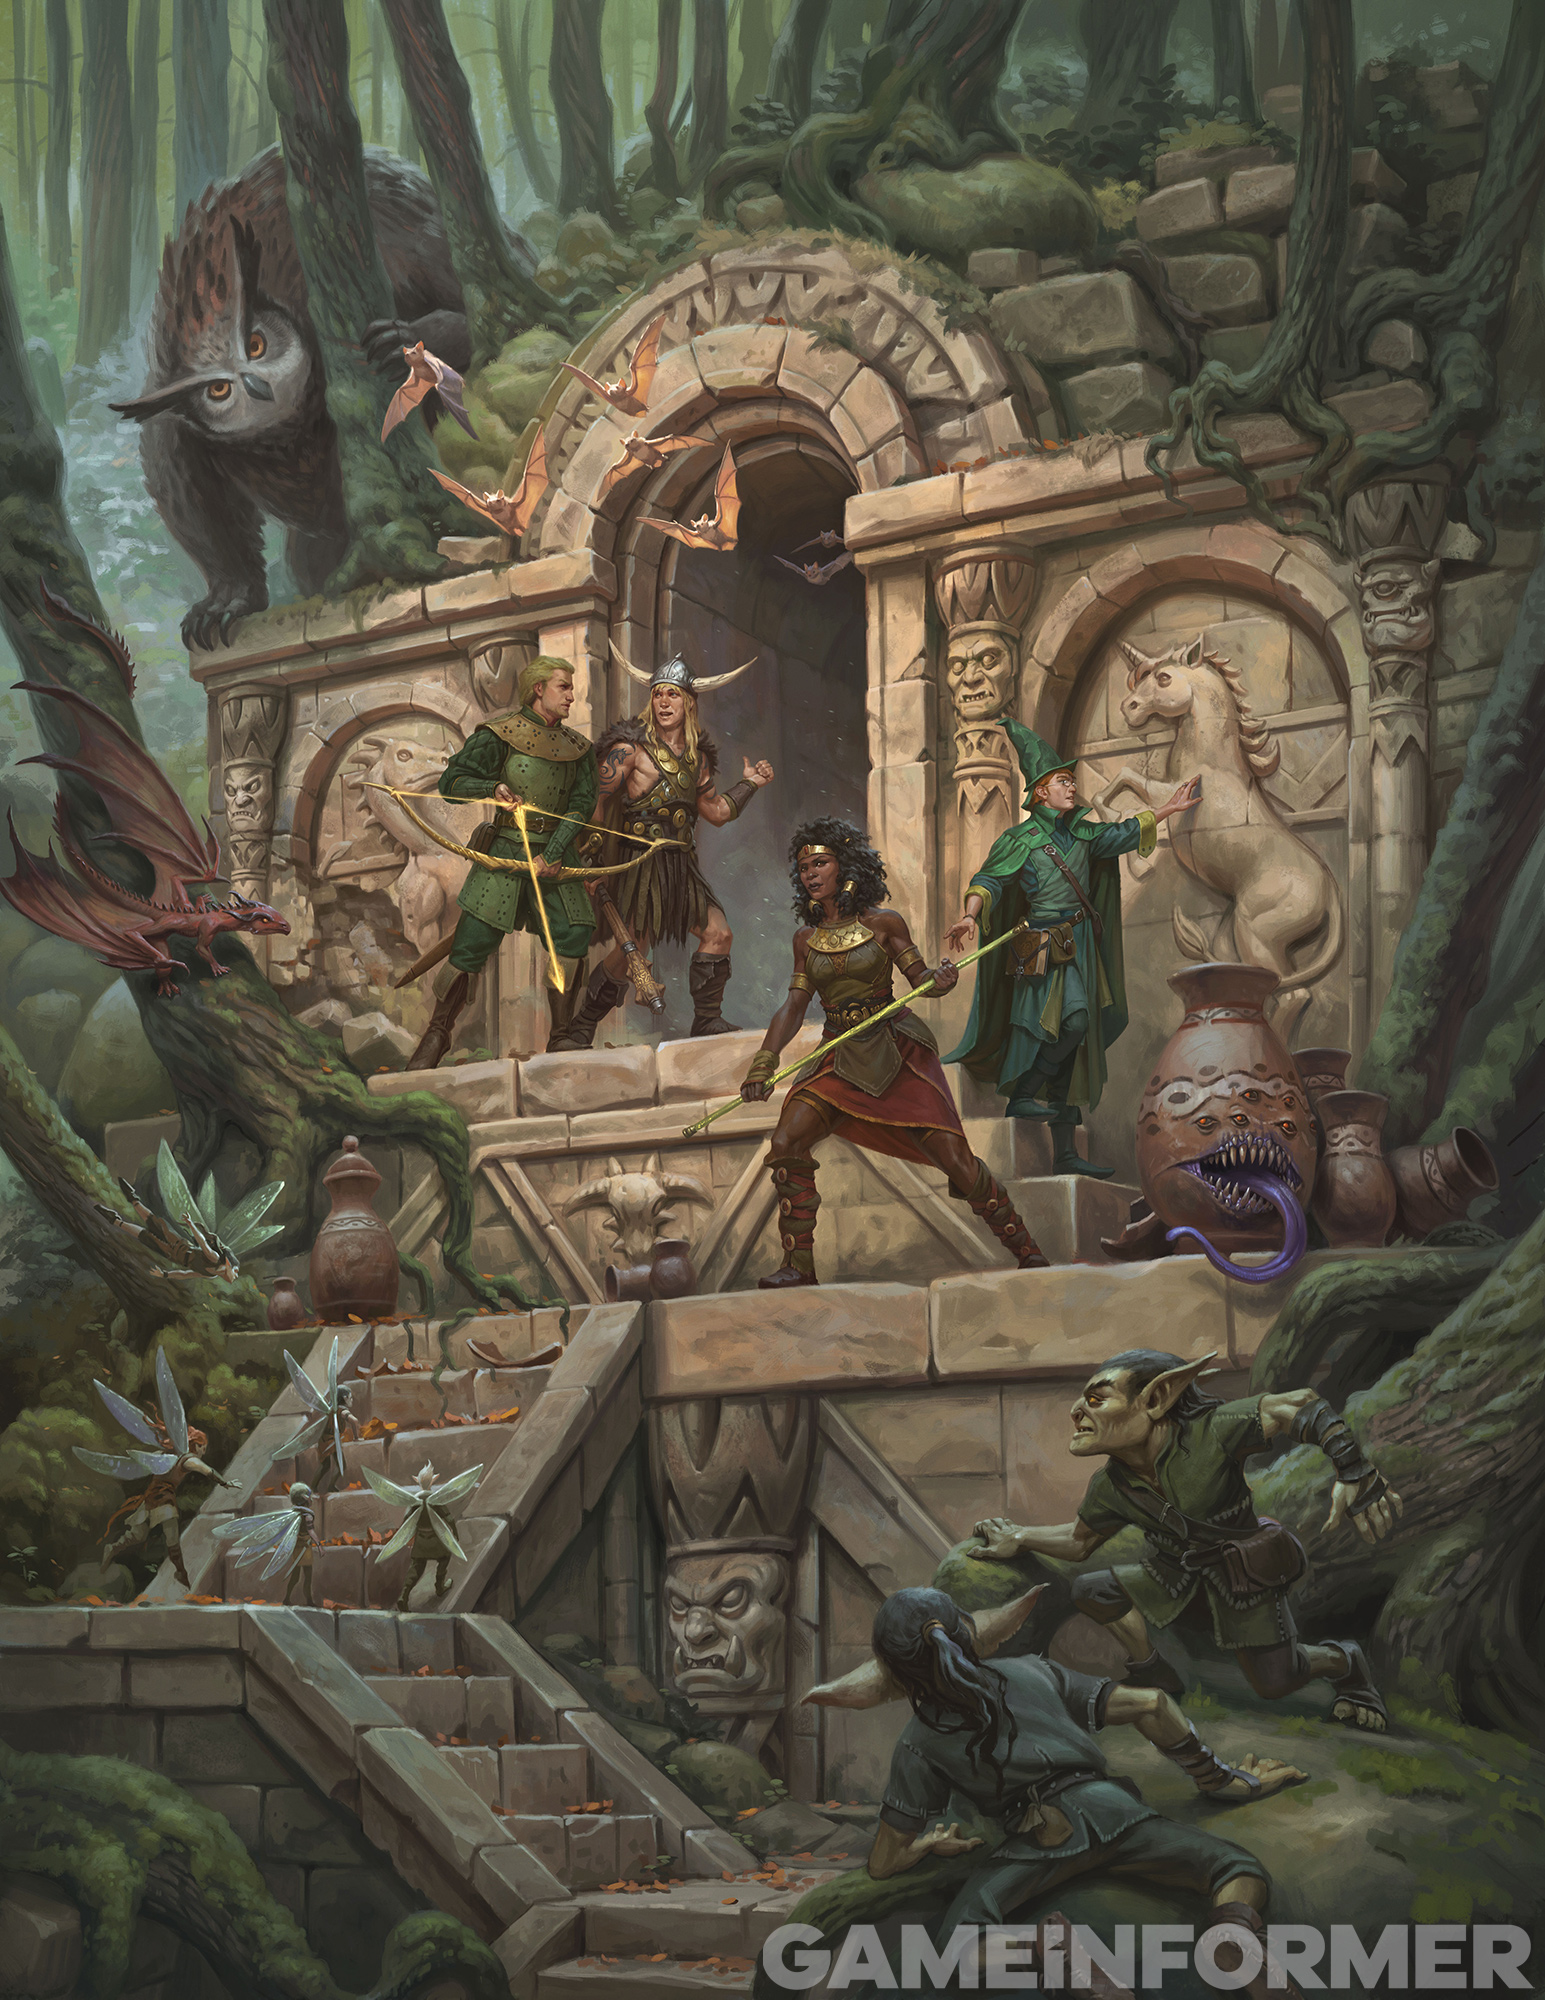 Dungeons & Dragons characters explore a ruin while monsters look on in artwork from the Game Informer reveal